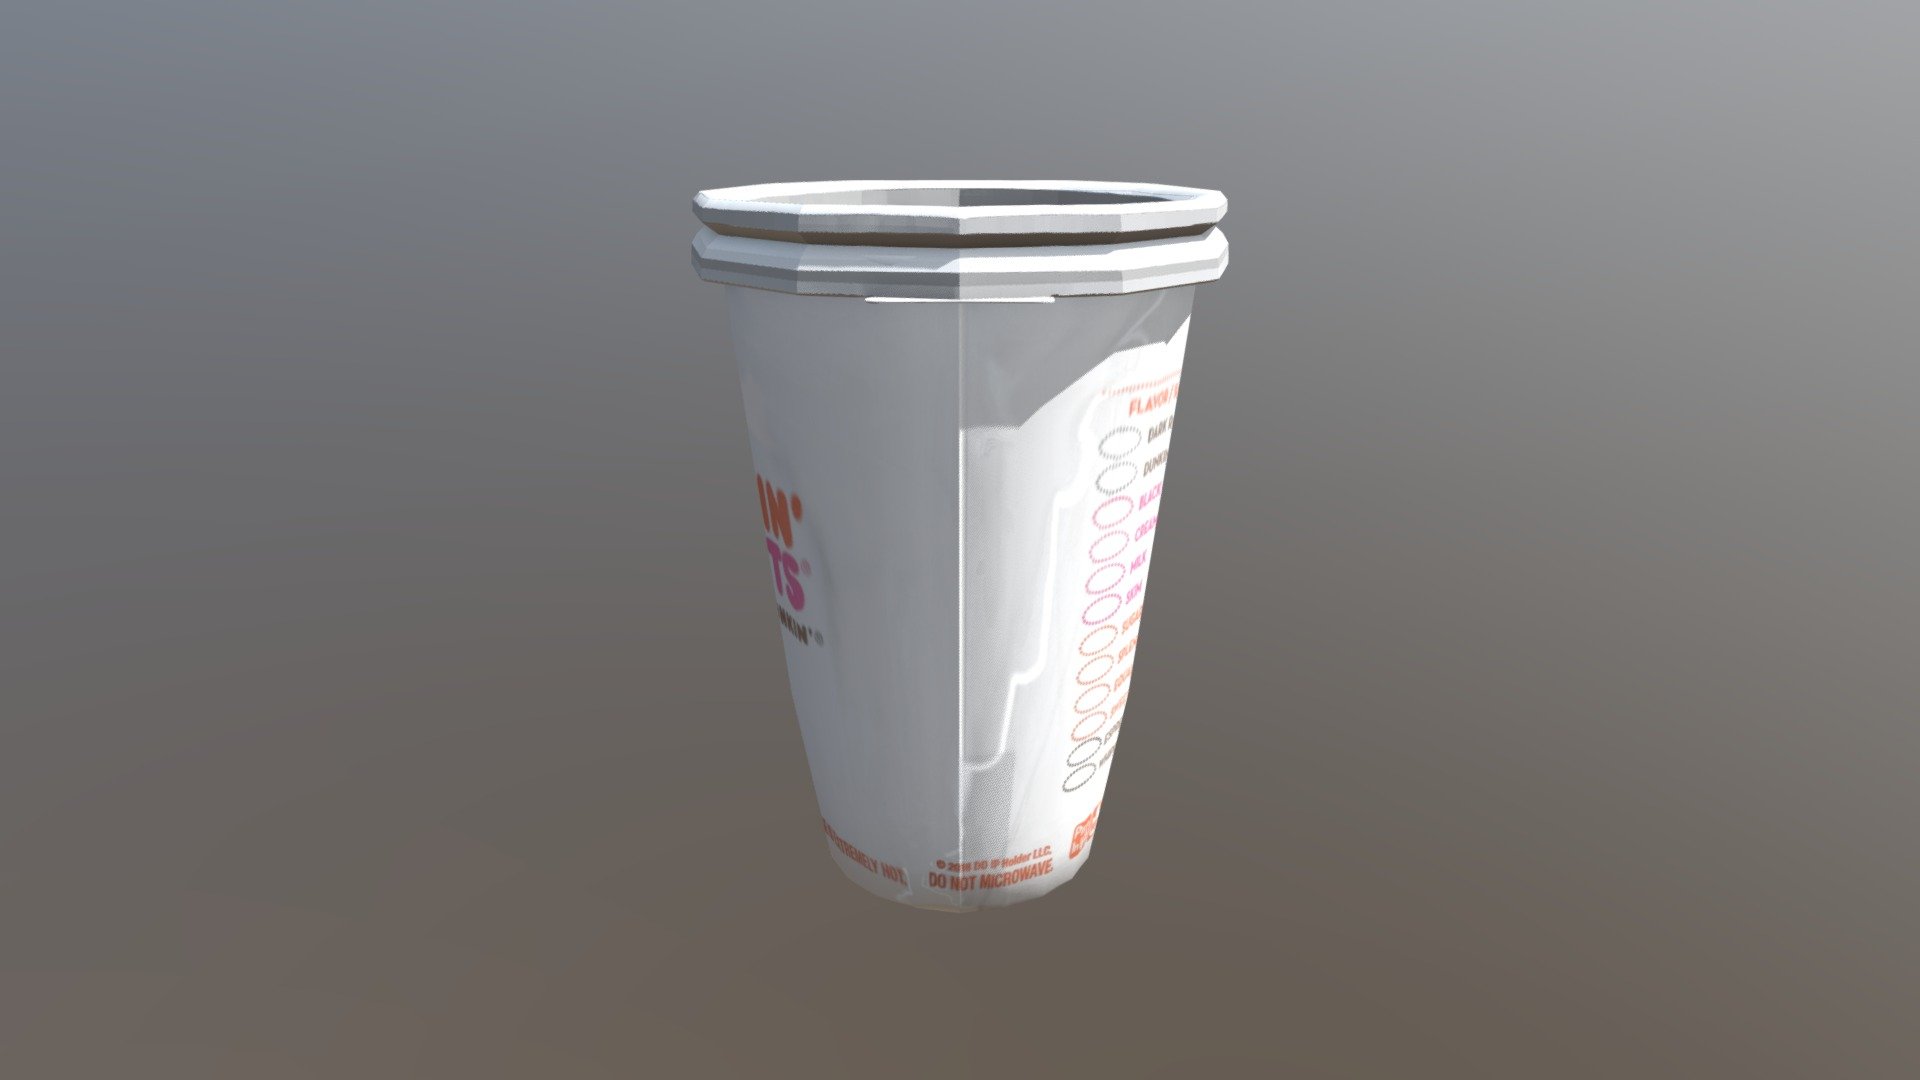 Dunkin Donuts Coffee Cup 3d Model By Simstres Simstres 7166793